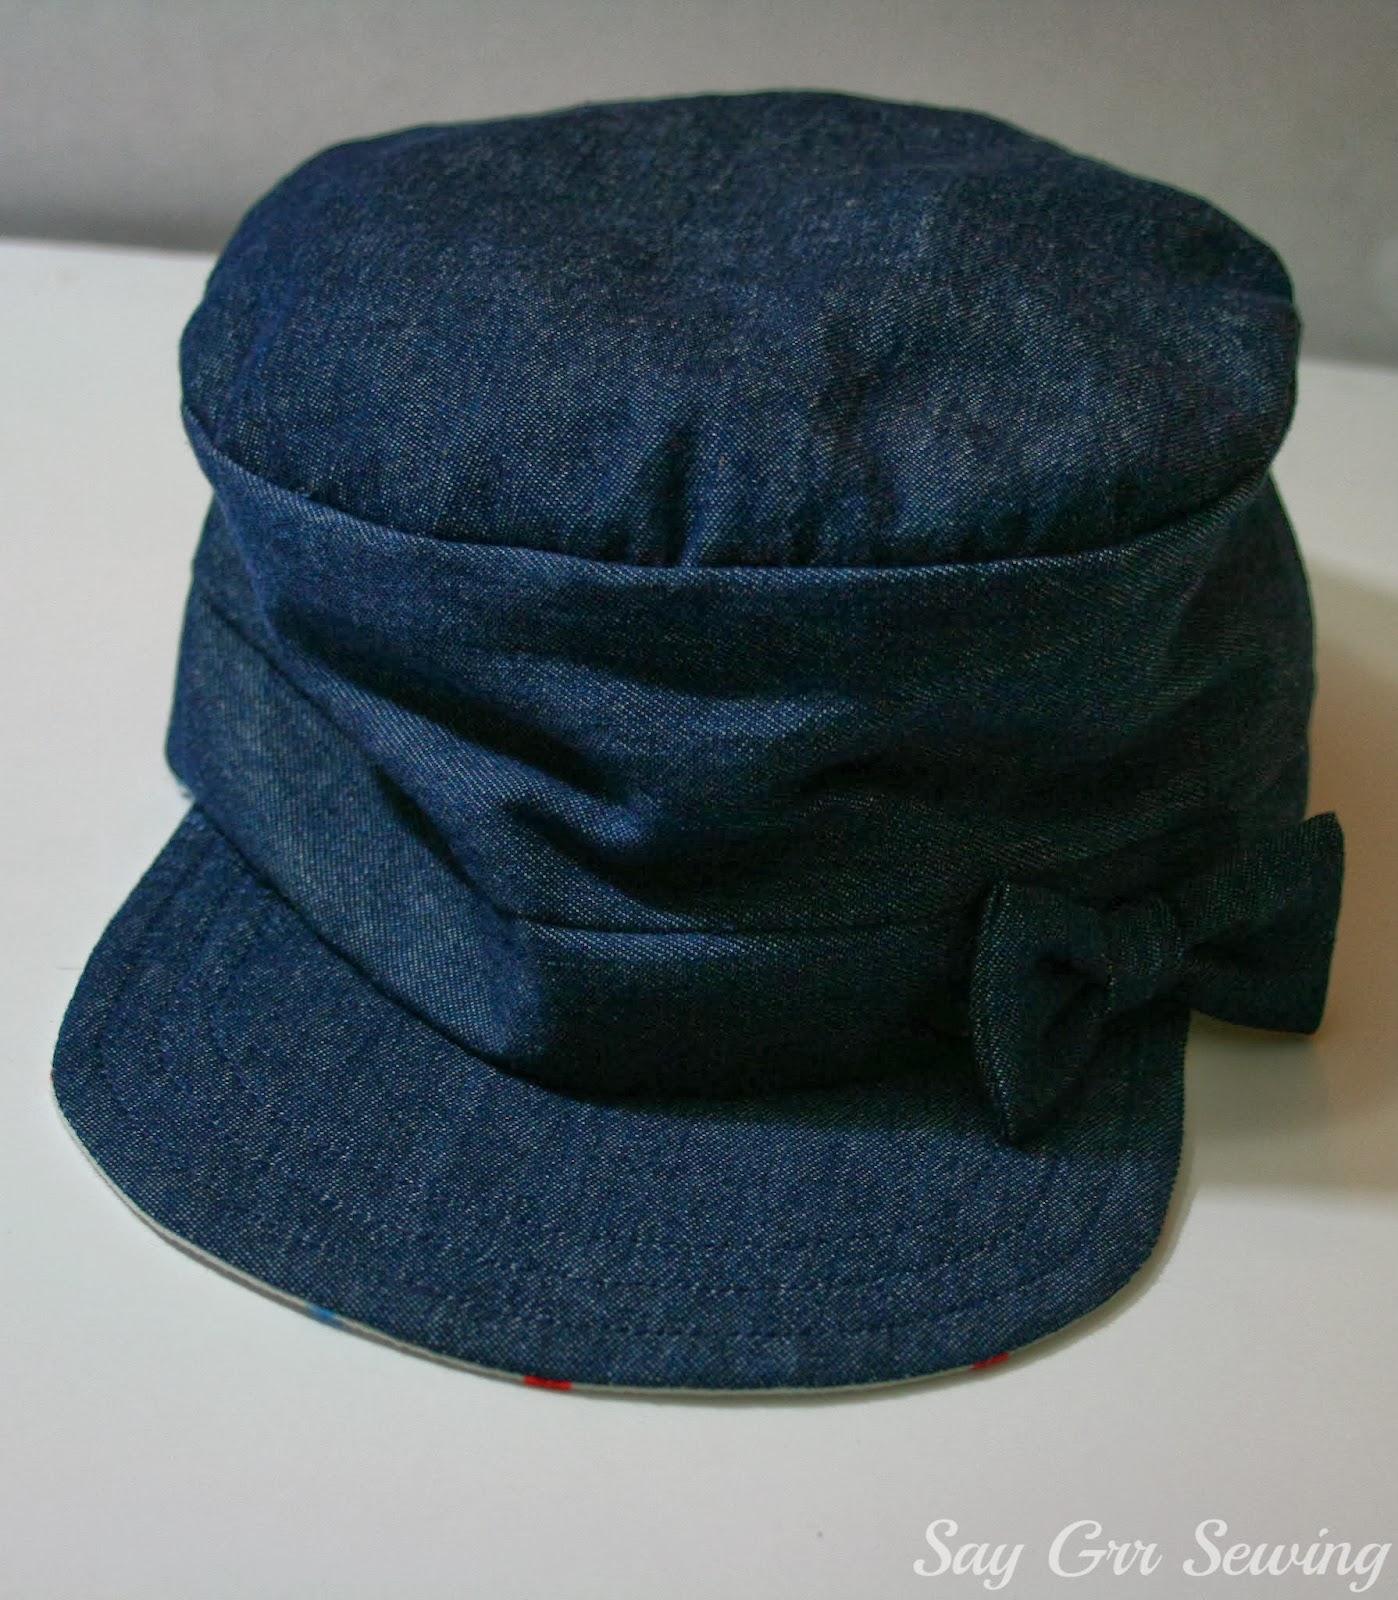 Say Grr Sewing: Corduroy And Denim Hats